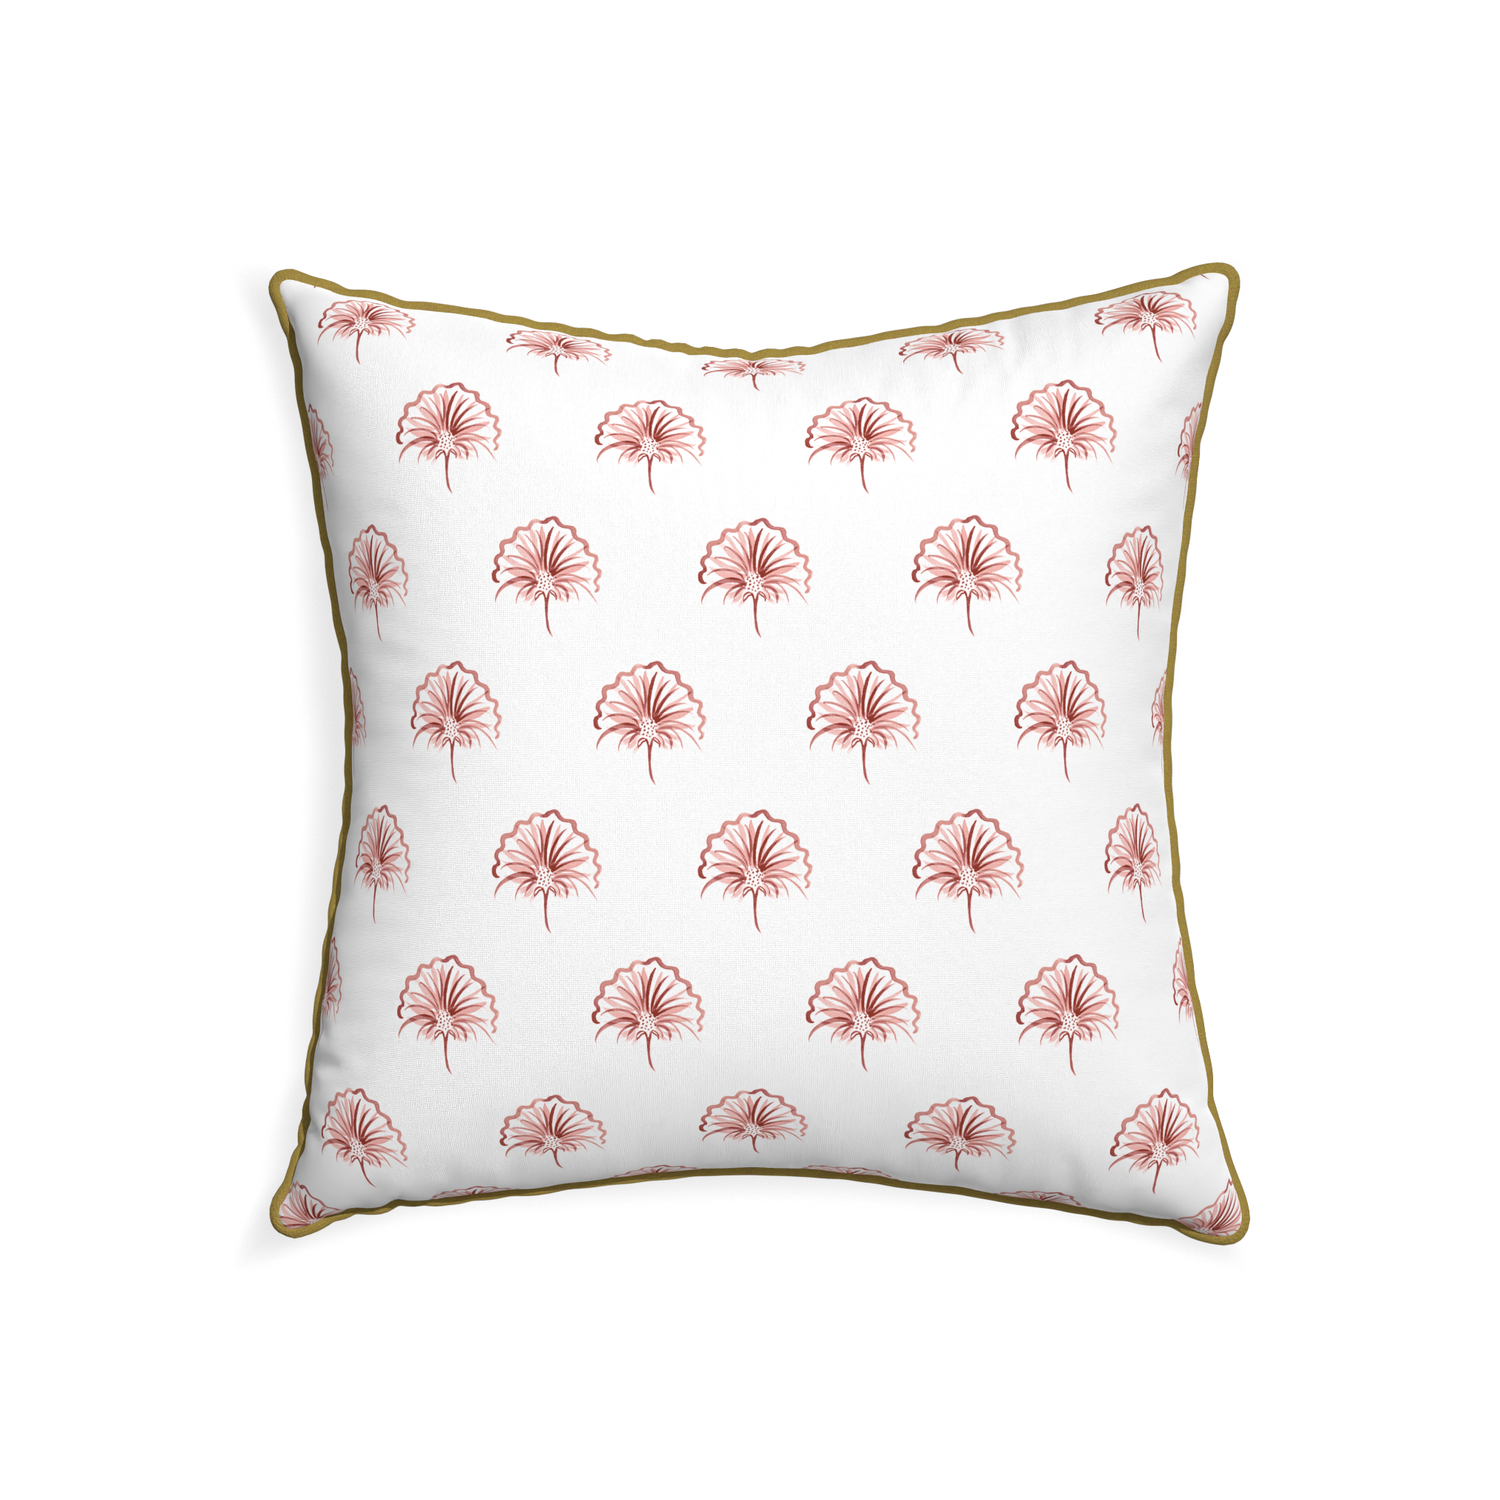 22-square penelope rose custom floral pinkpillow with c piping on white background